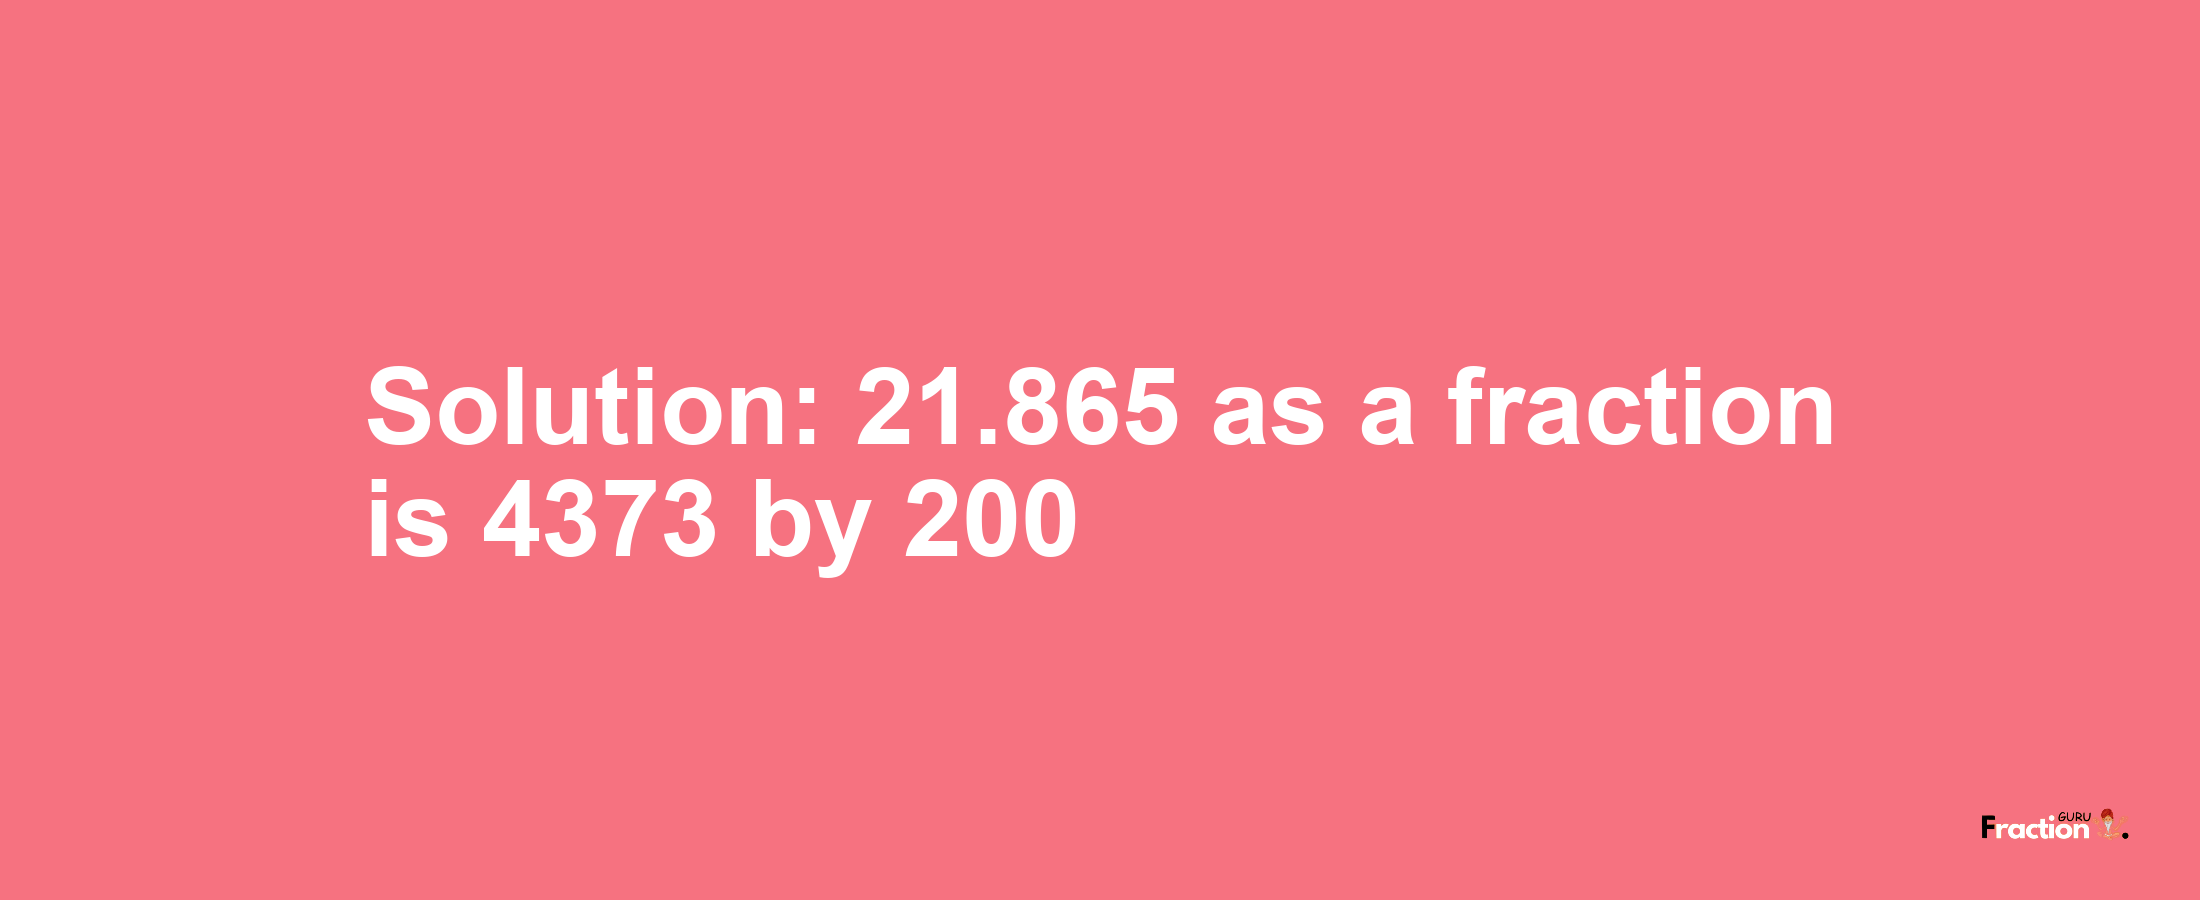 Solution:21.865 as a fraction is 4373/200